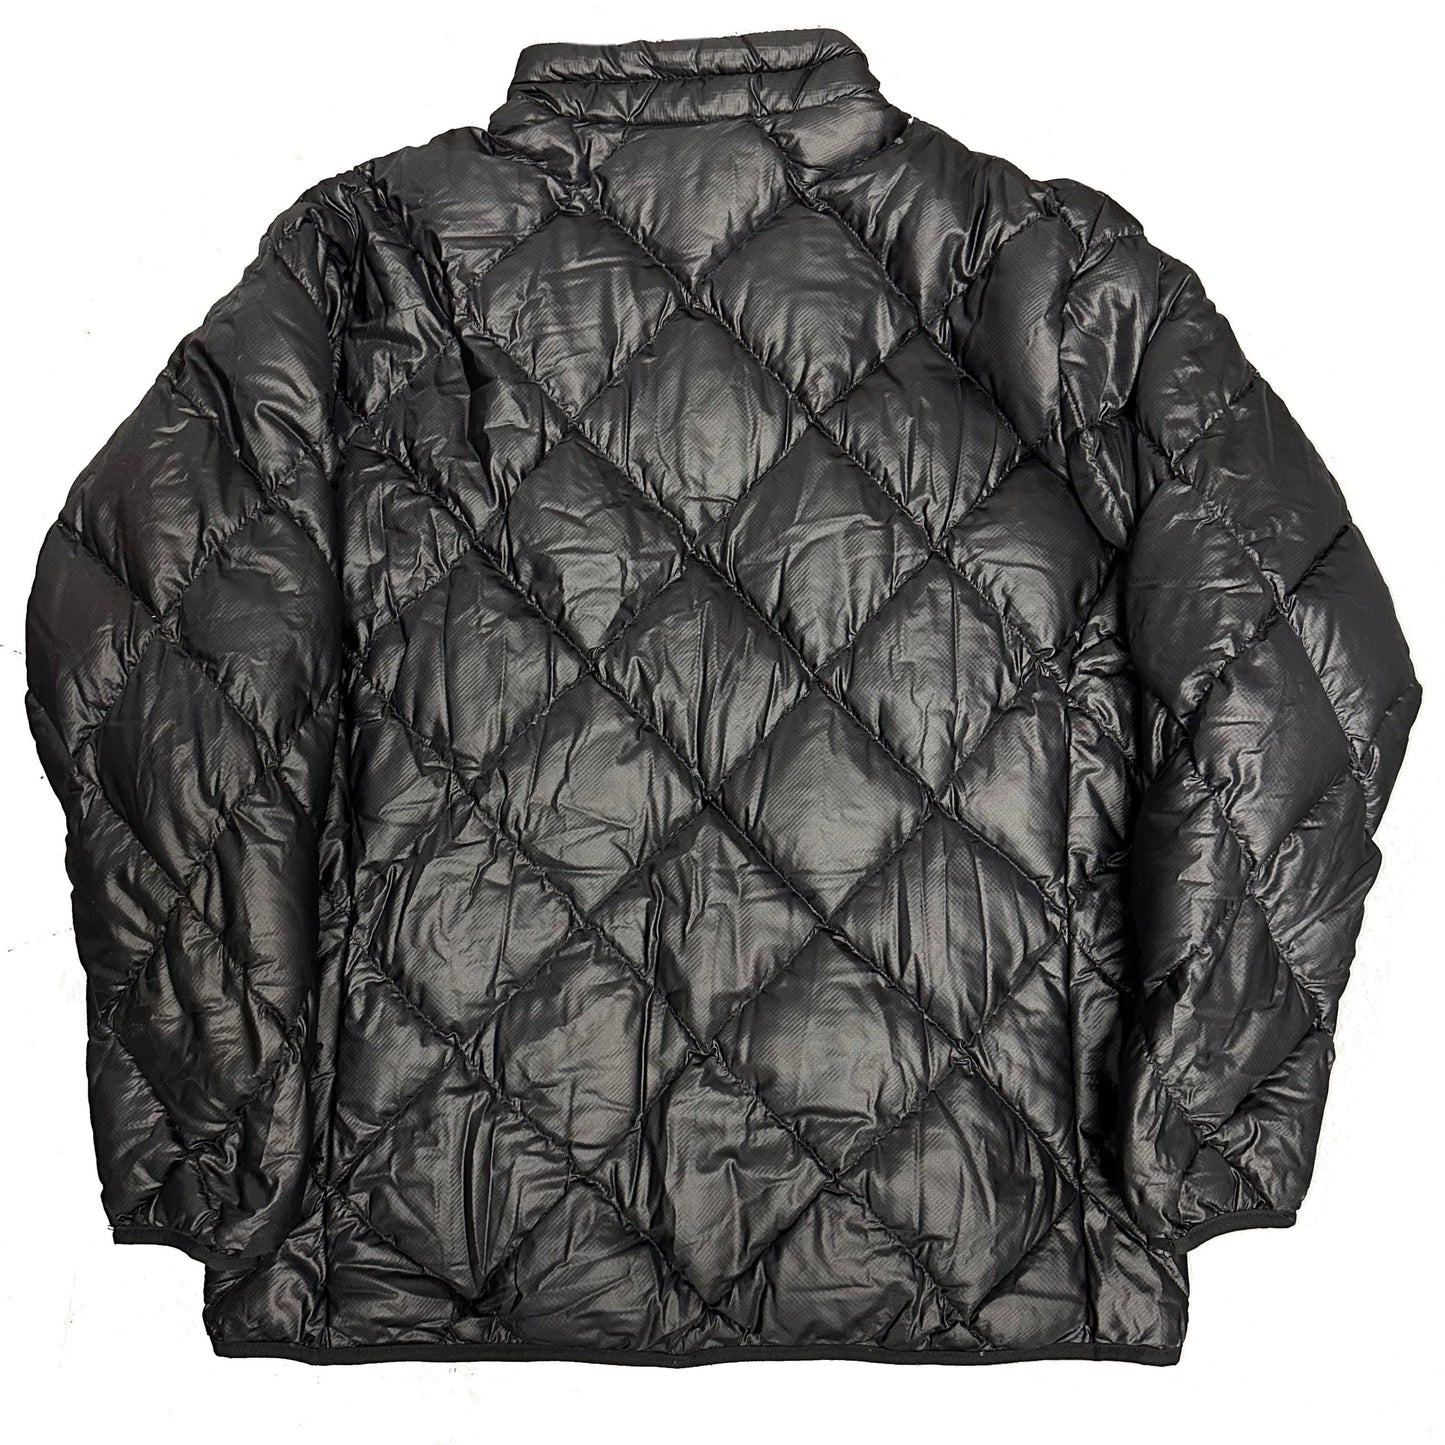 Montbell Diamond Stitch Down Puffer Jacket In Black ( Wmn’s L ) - Known Source